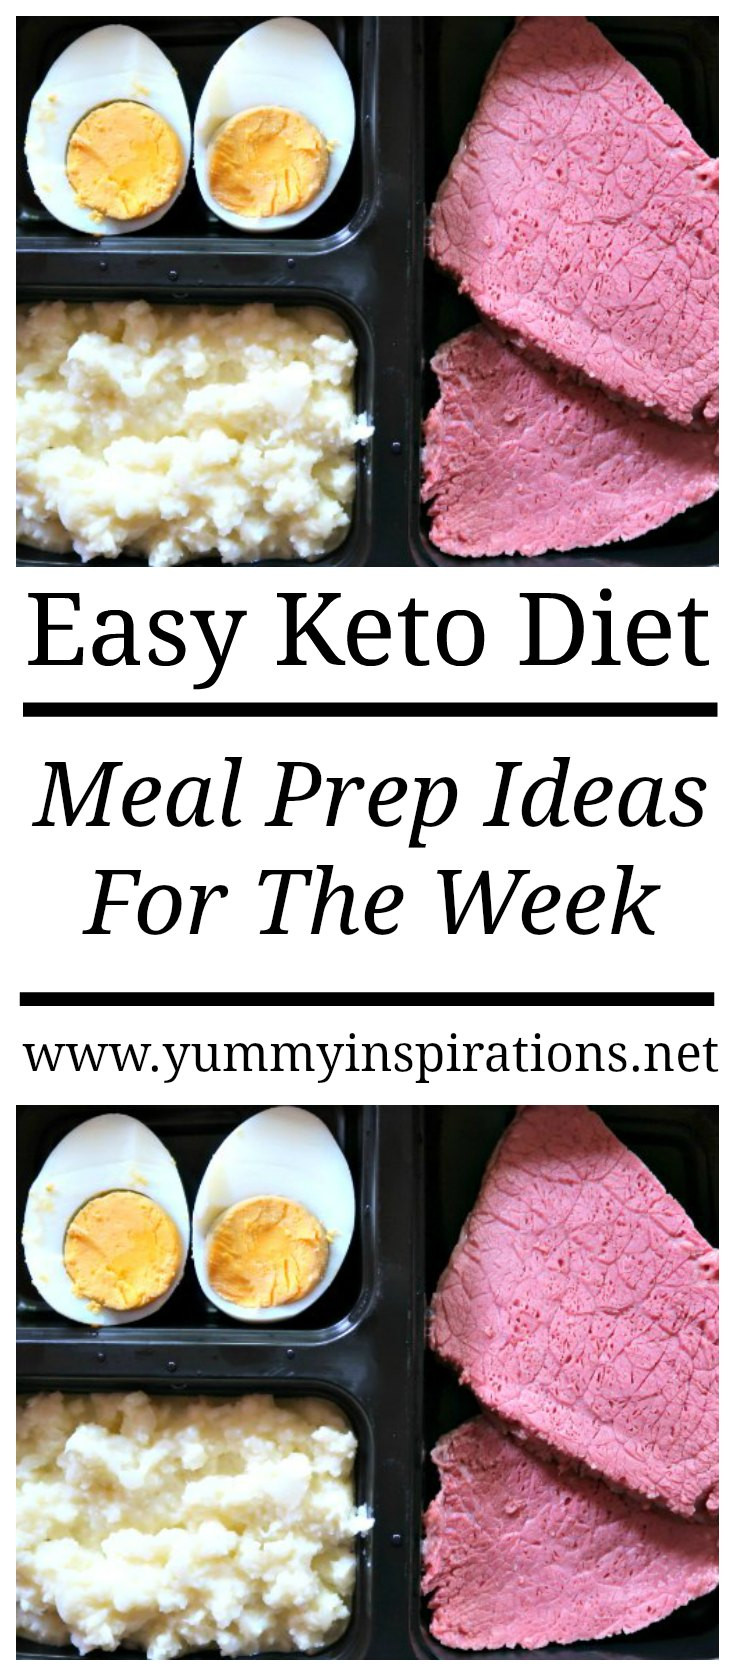 Keto Diet Meal Prep For The Week
 Keto Meal Prep Ideas For The Week Easy Sunday Low Carb